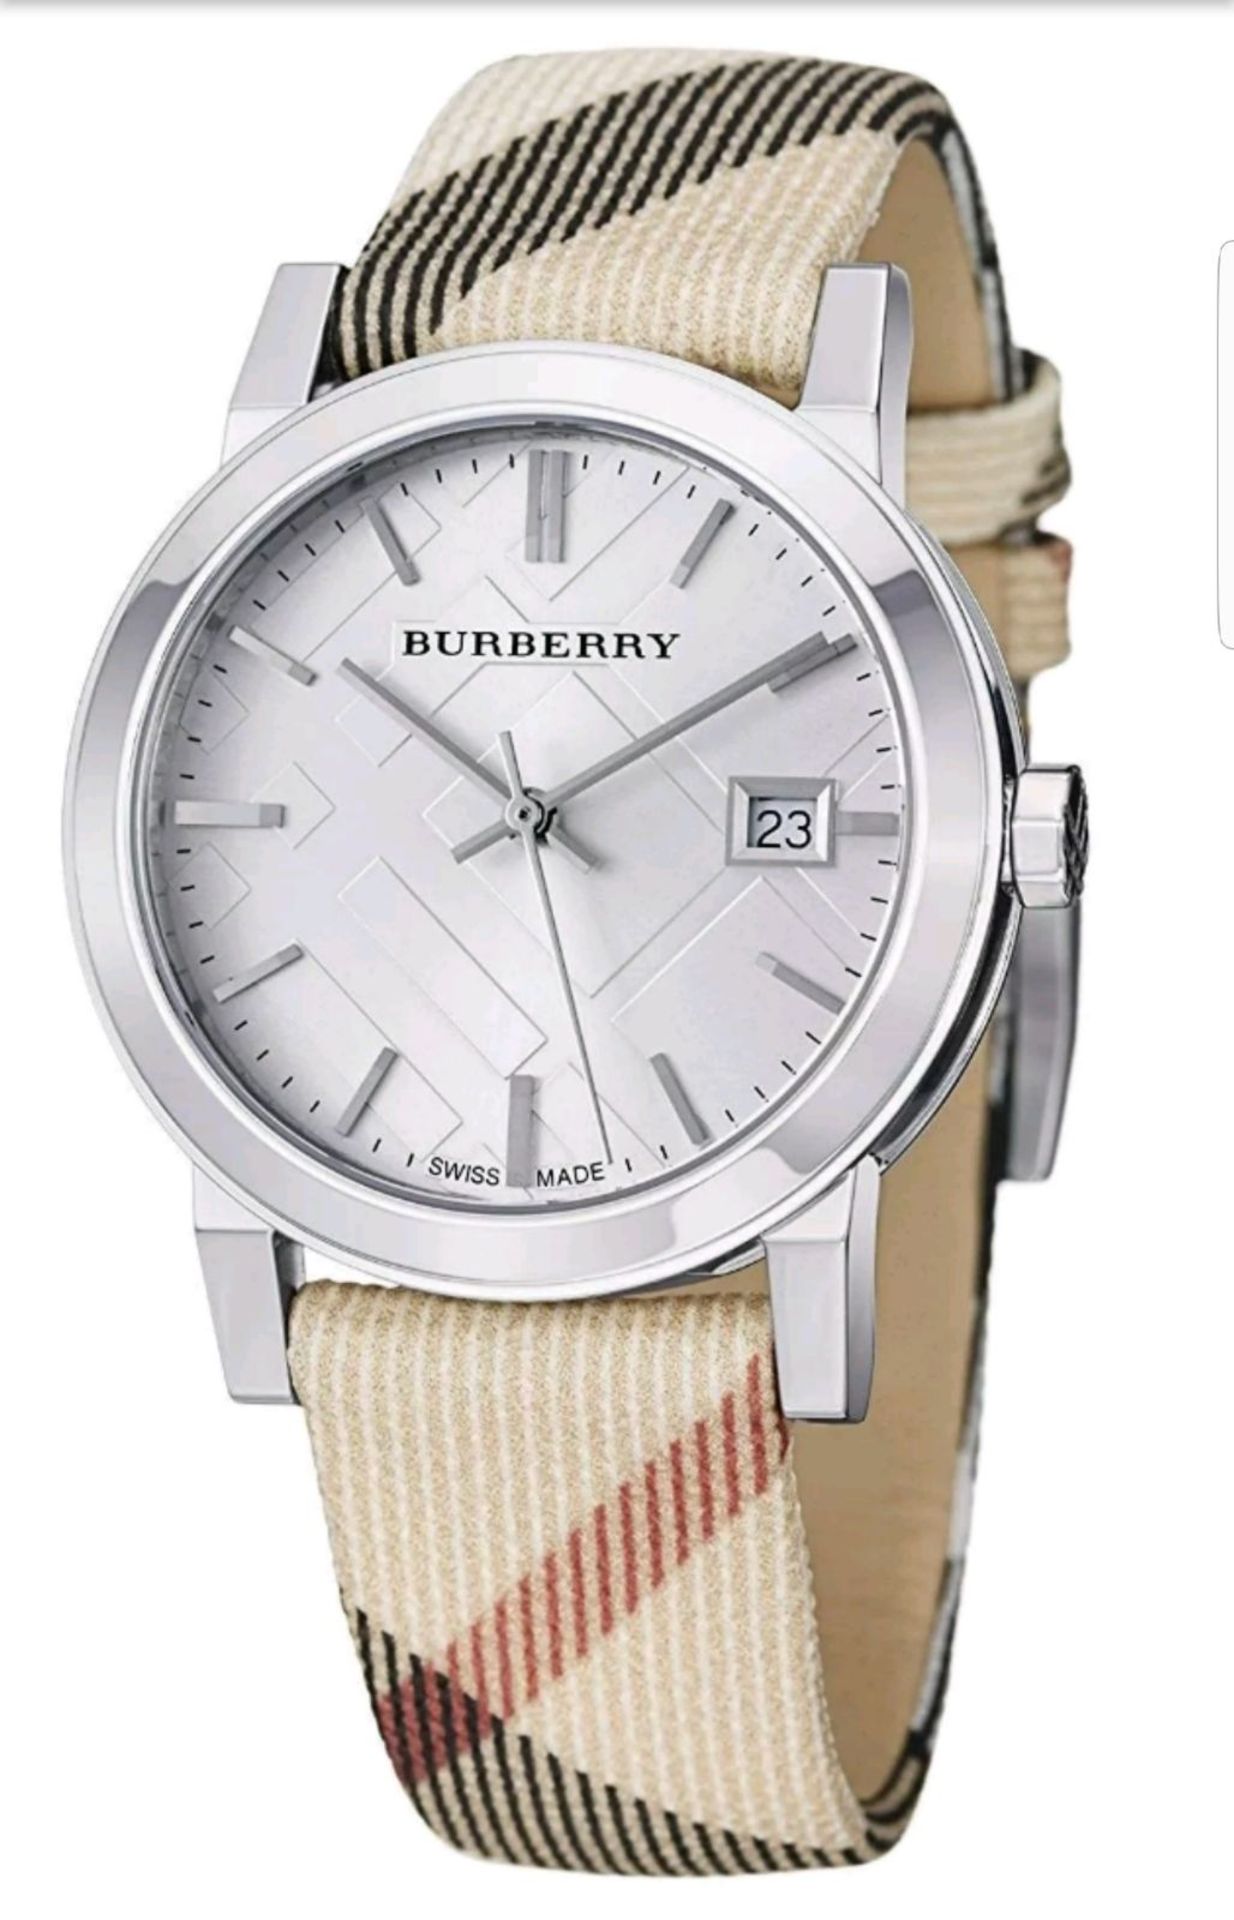 BRAND NEW LADIES BURBERRY WATCH BU9113, COMPLETE WITH ORIGINAL BOX AND MANUAL